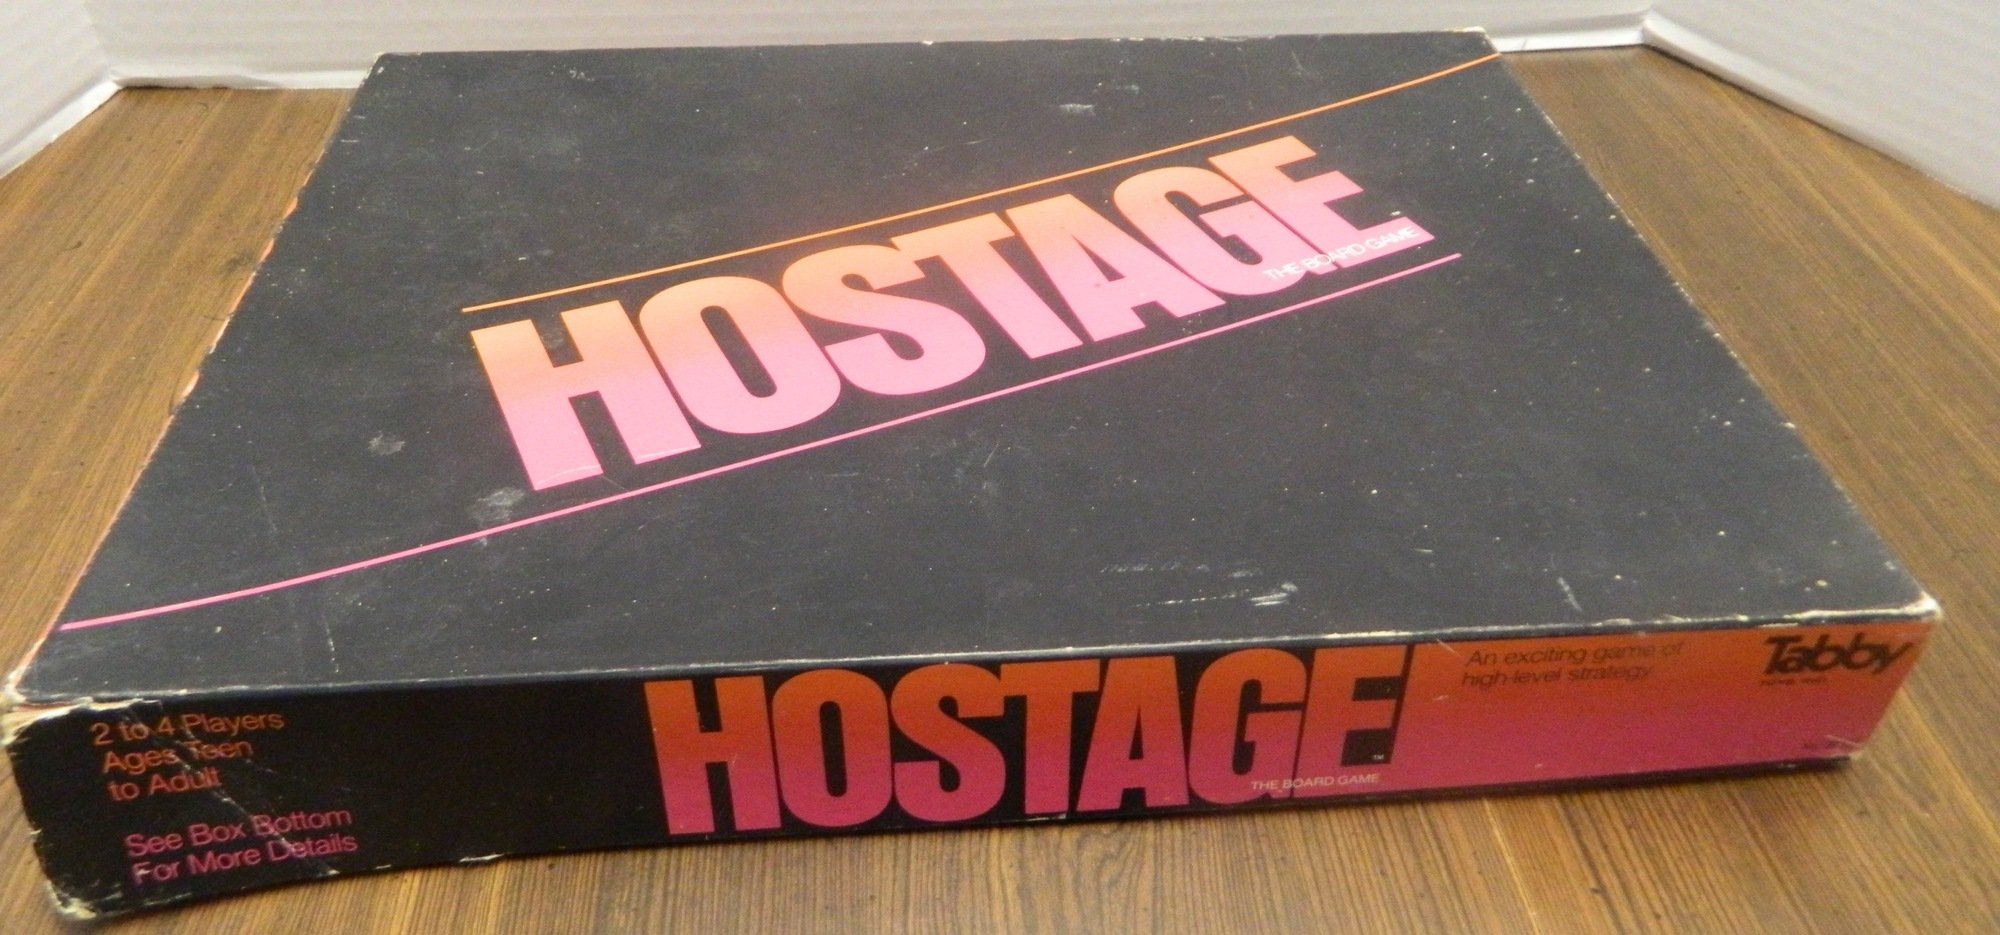 Hostage the Board Game Box